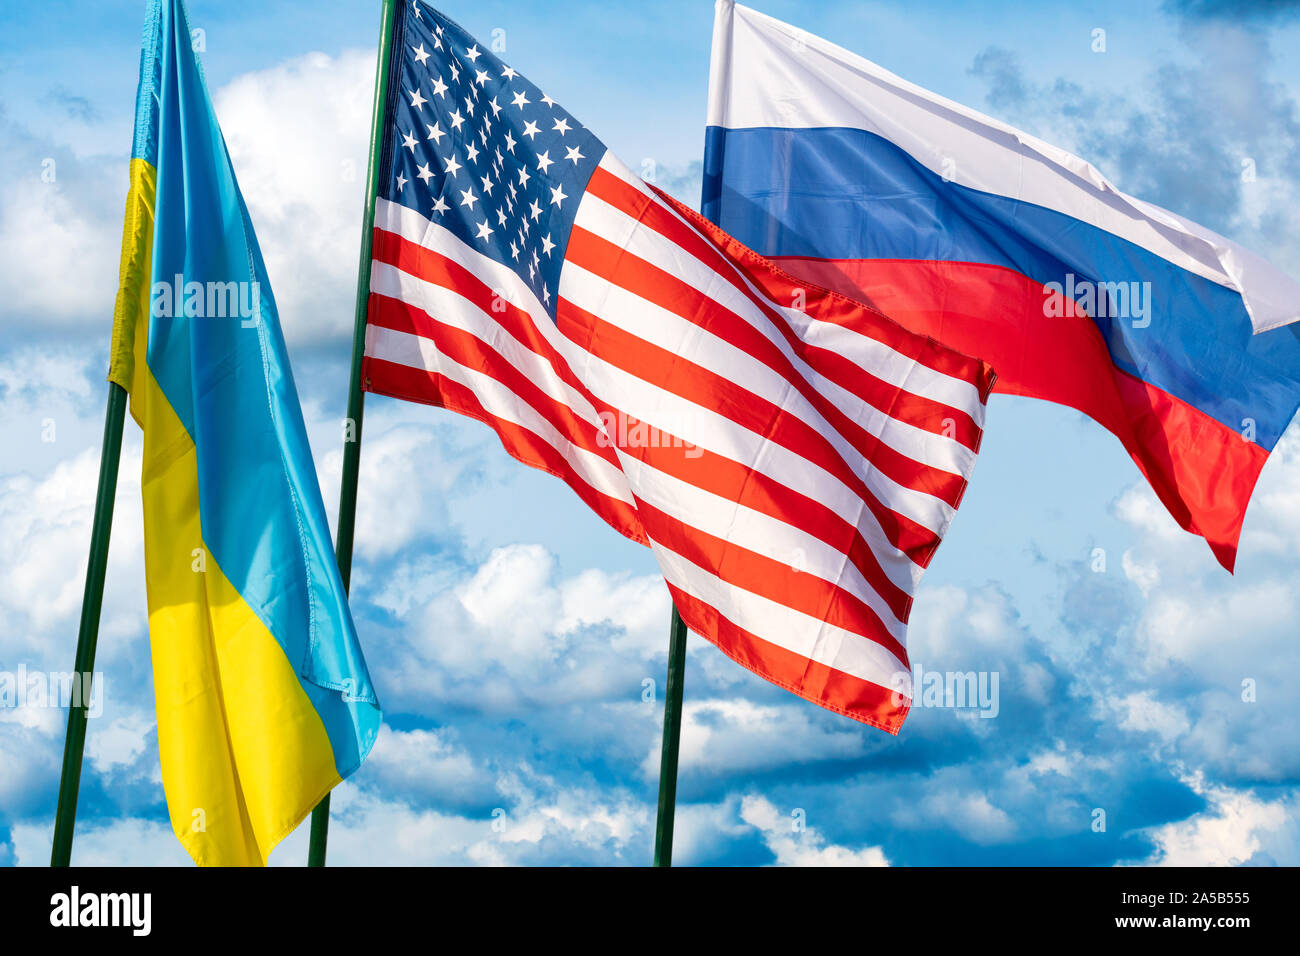 Russia flag waving cloudy sky background